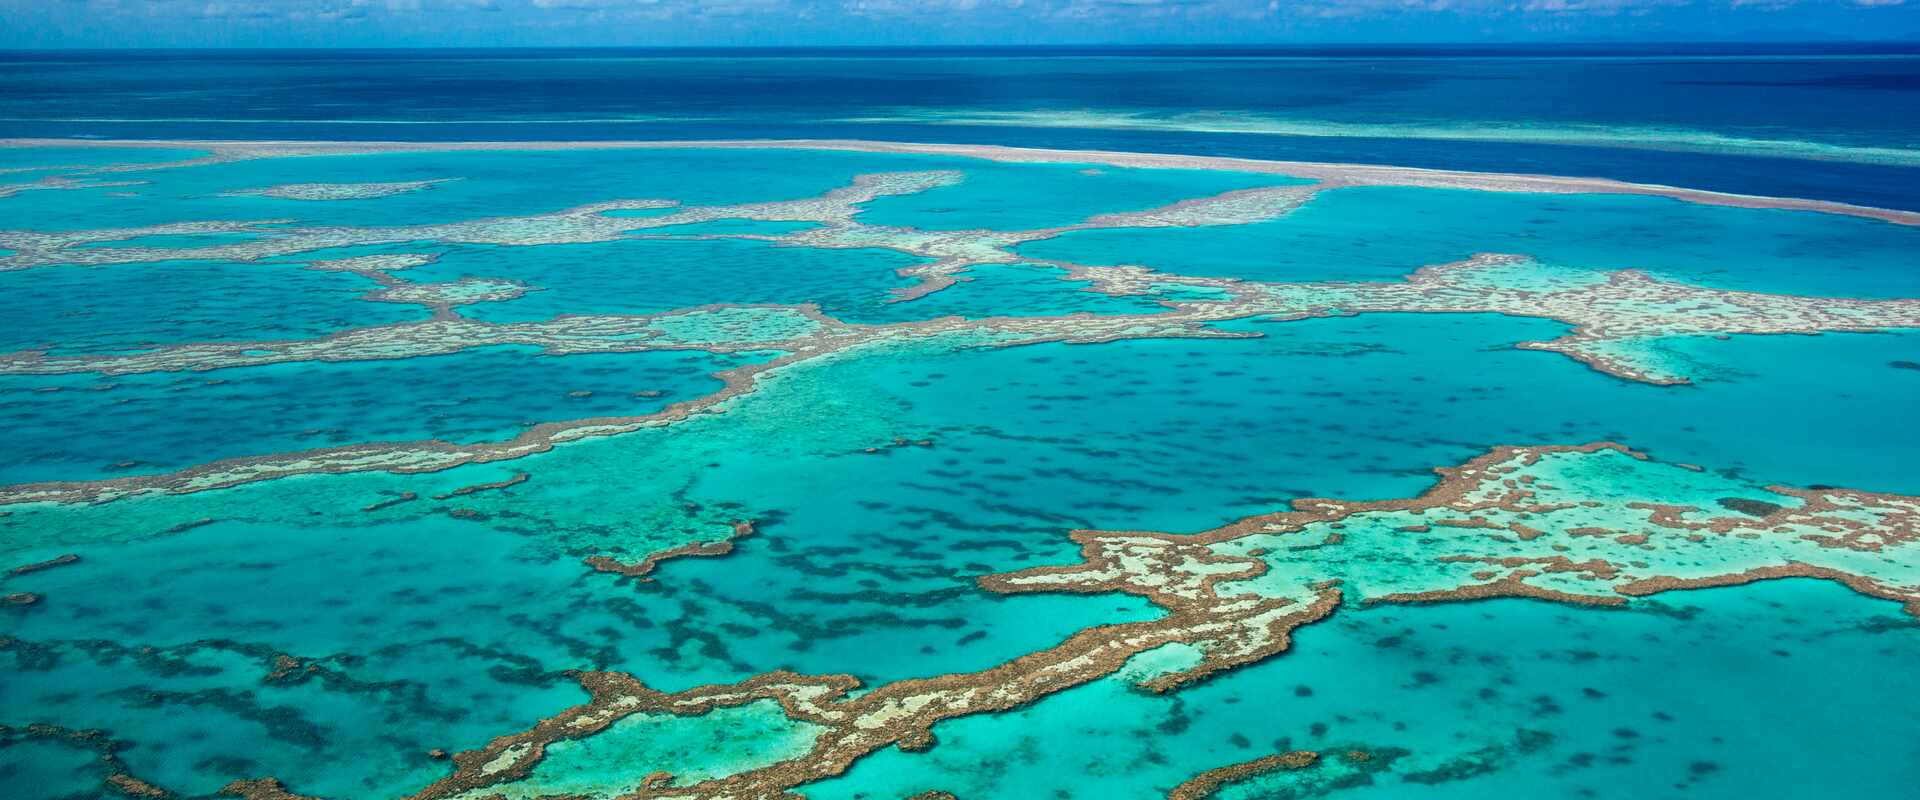 Aerial view of the Great Barrier Reef and its vibrant turquoise colours